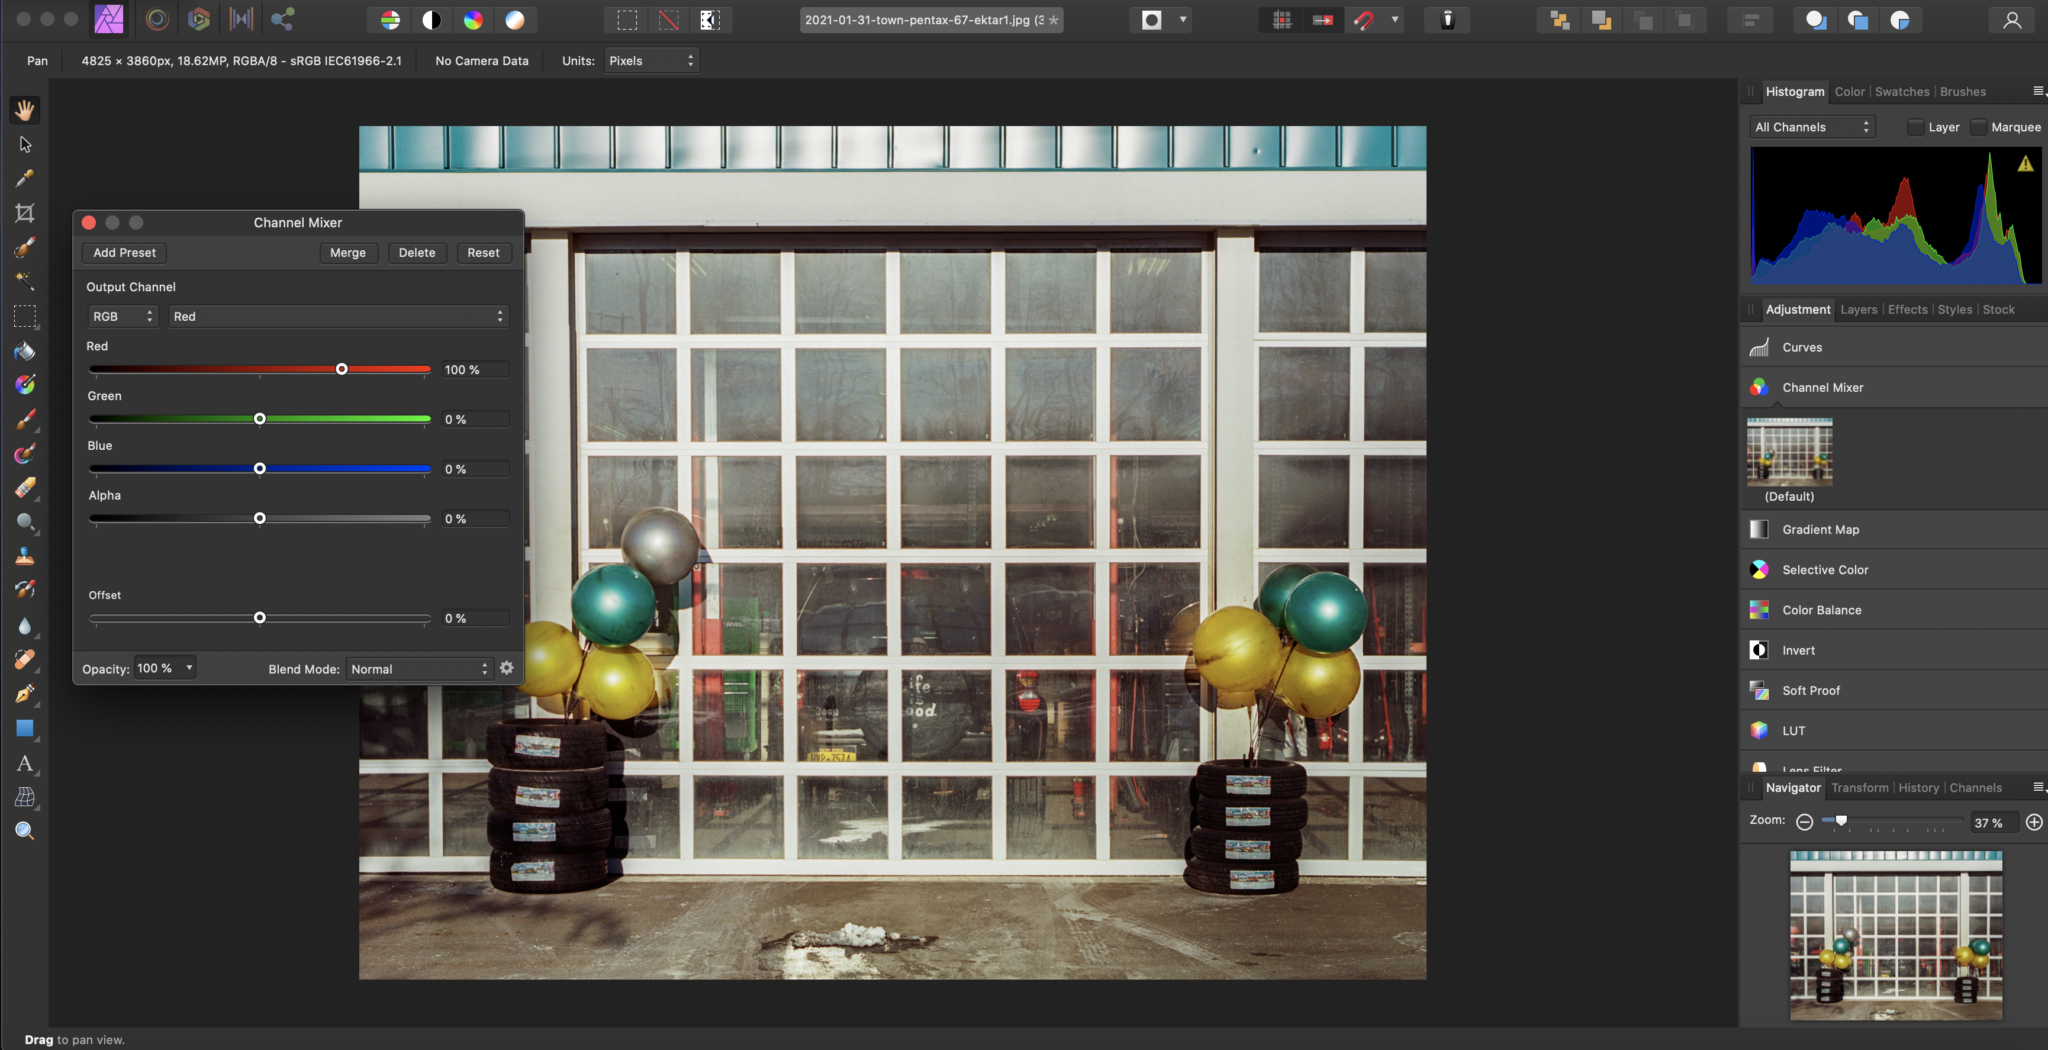 affinity photo editor free download